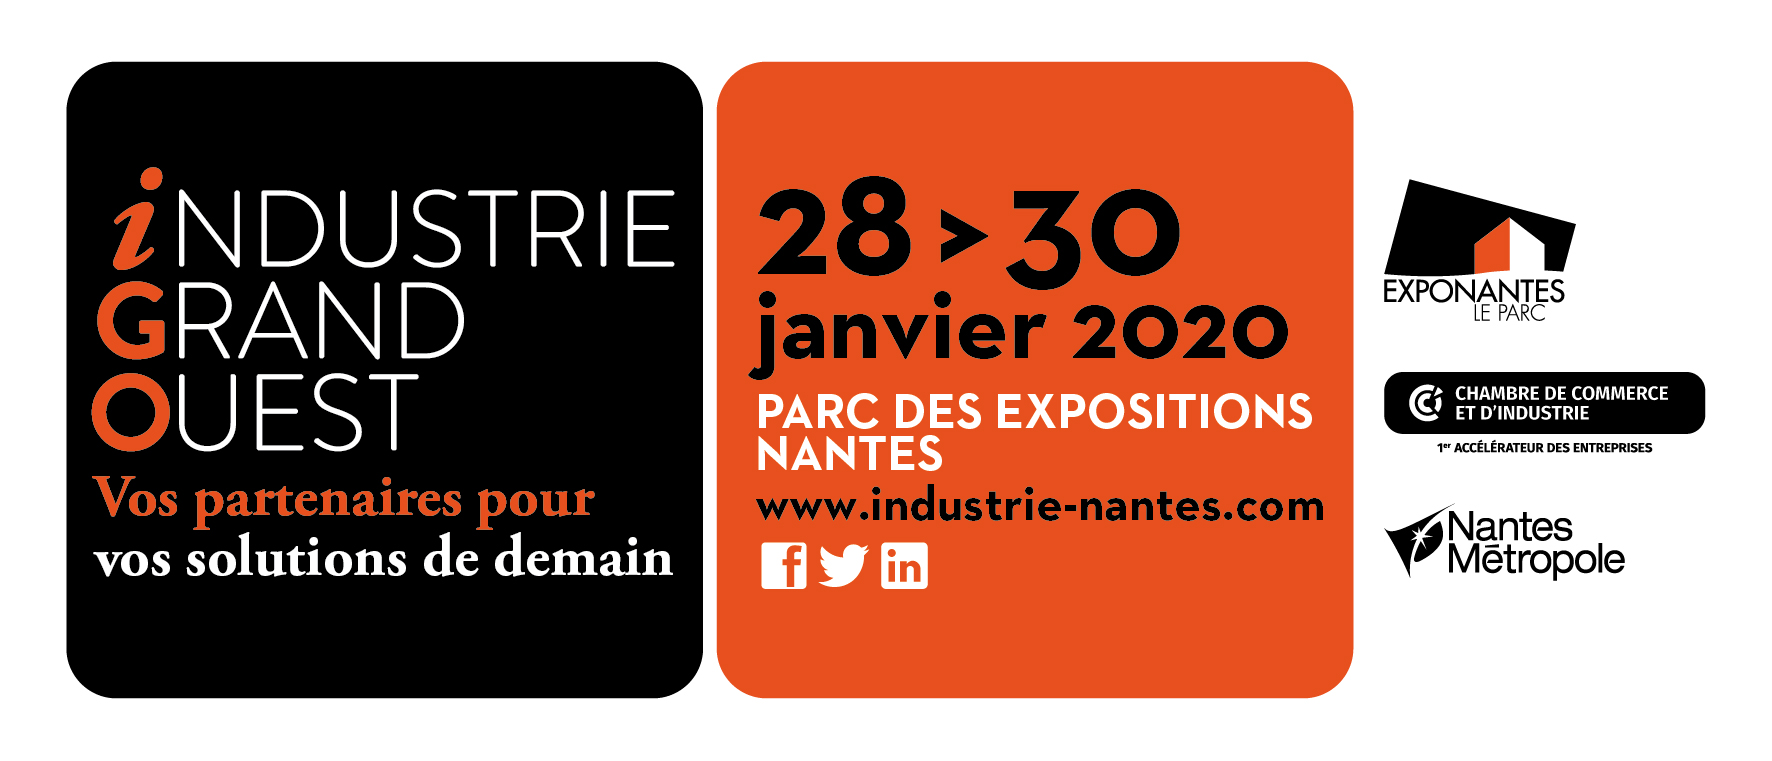 Industrie Grand Ouest Nantes 2020